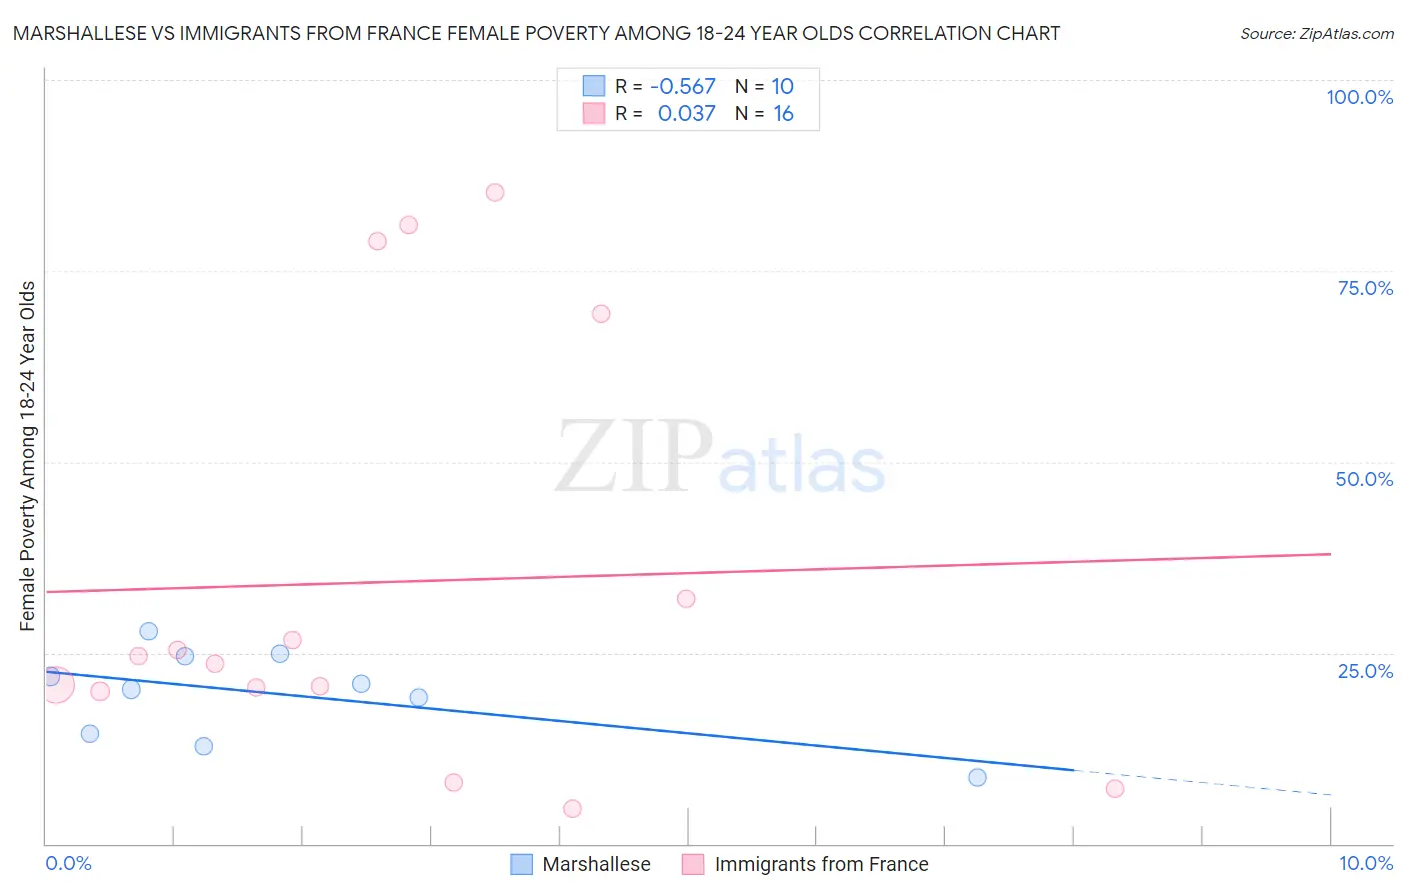 Marshallese vs Immigrants from France Female Poverty Among 18-24 Year Olds